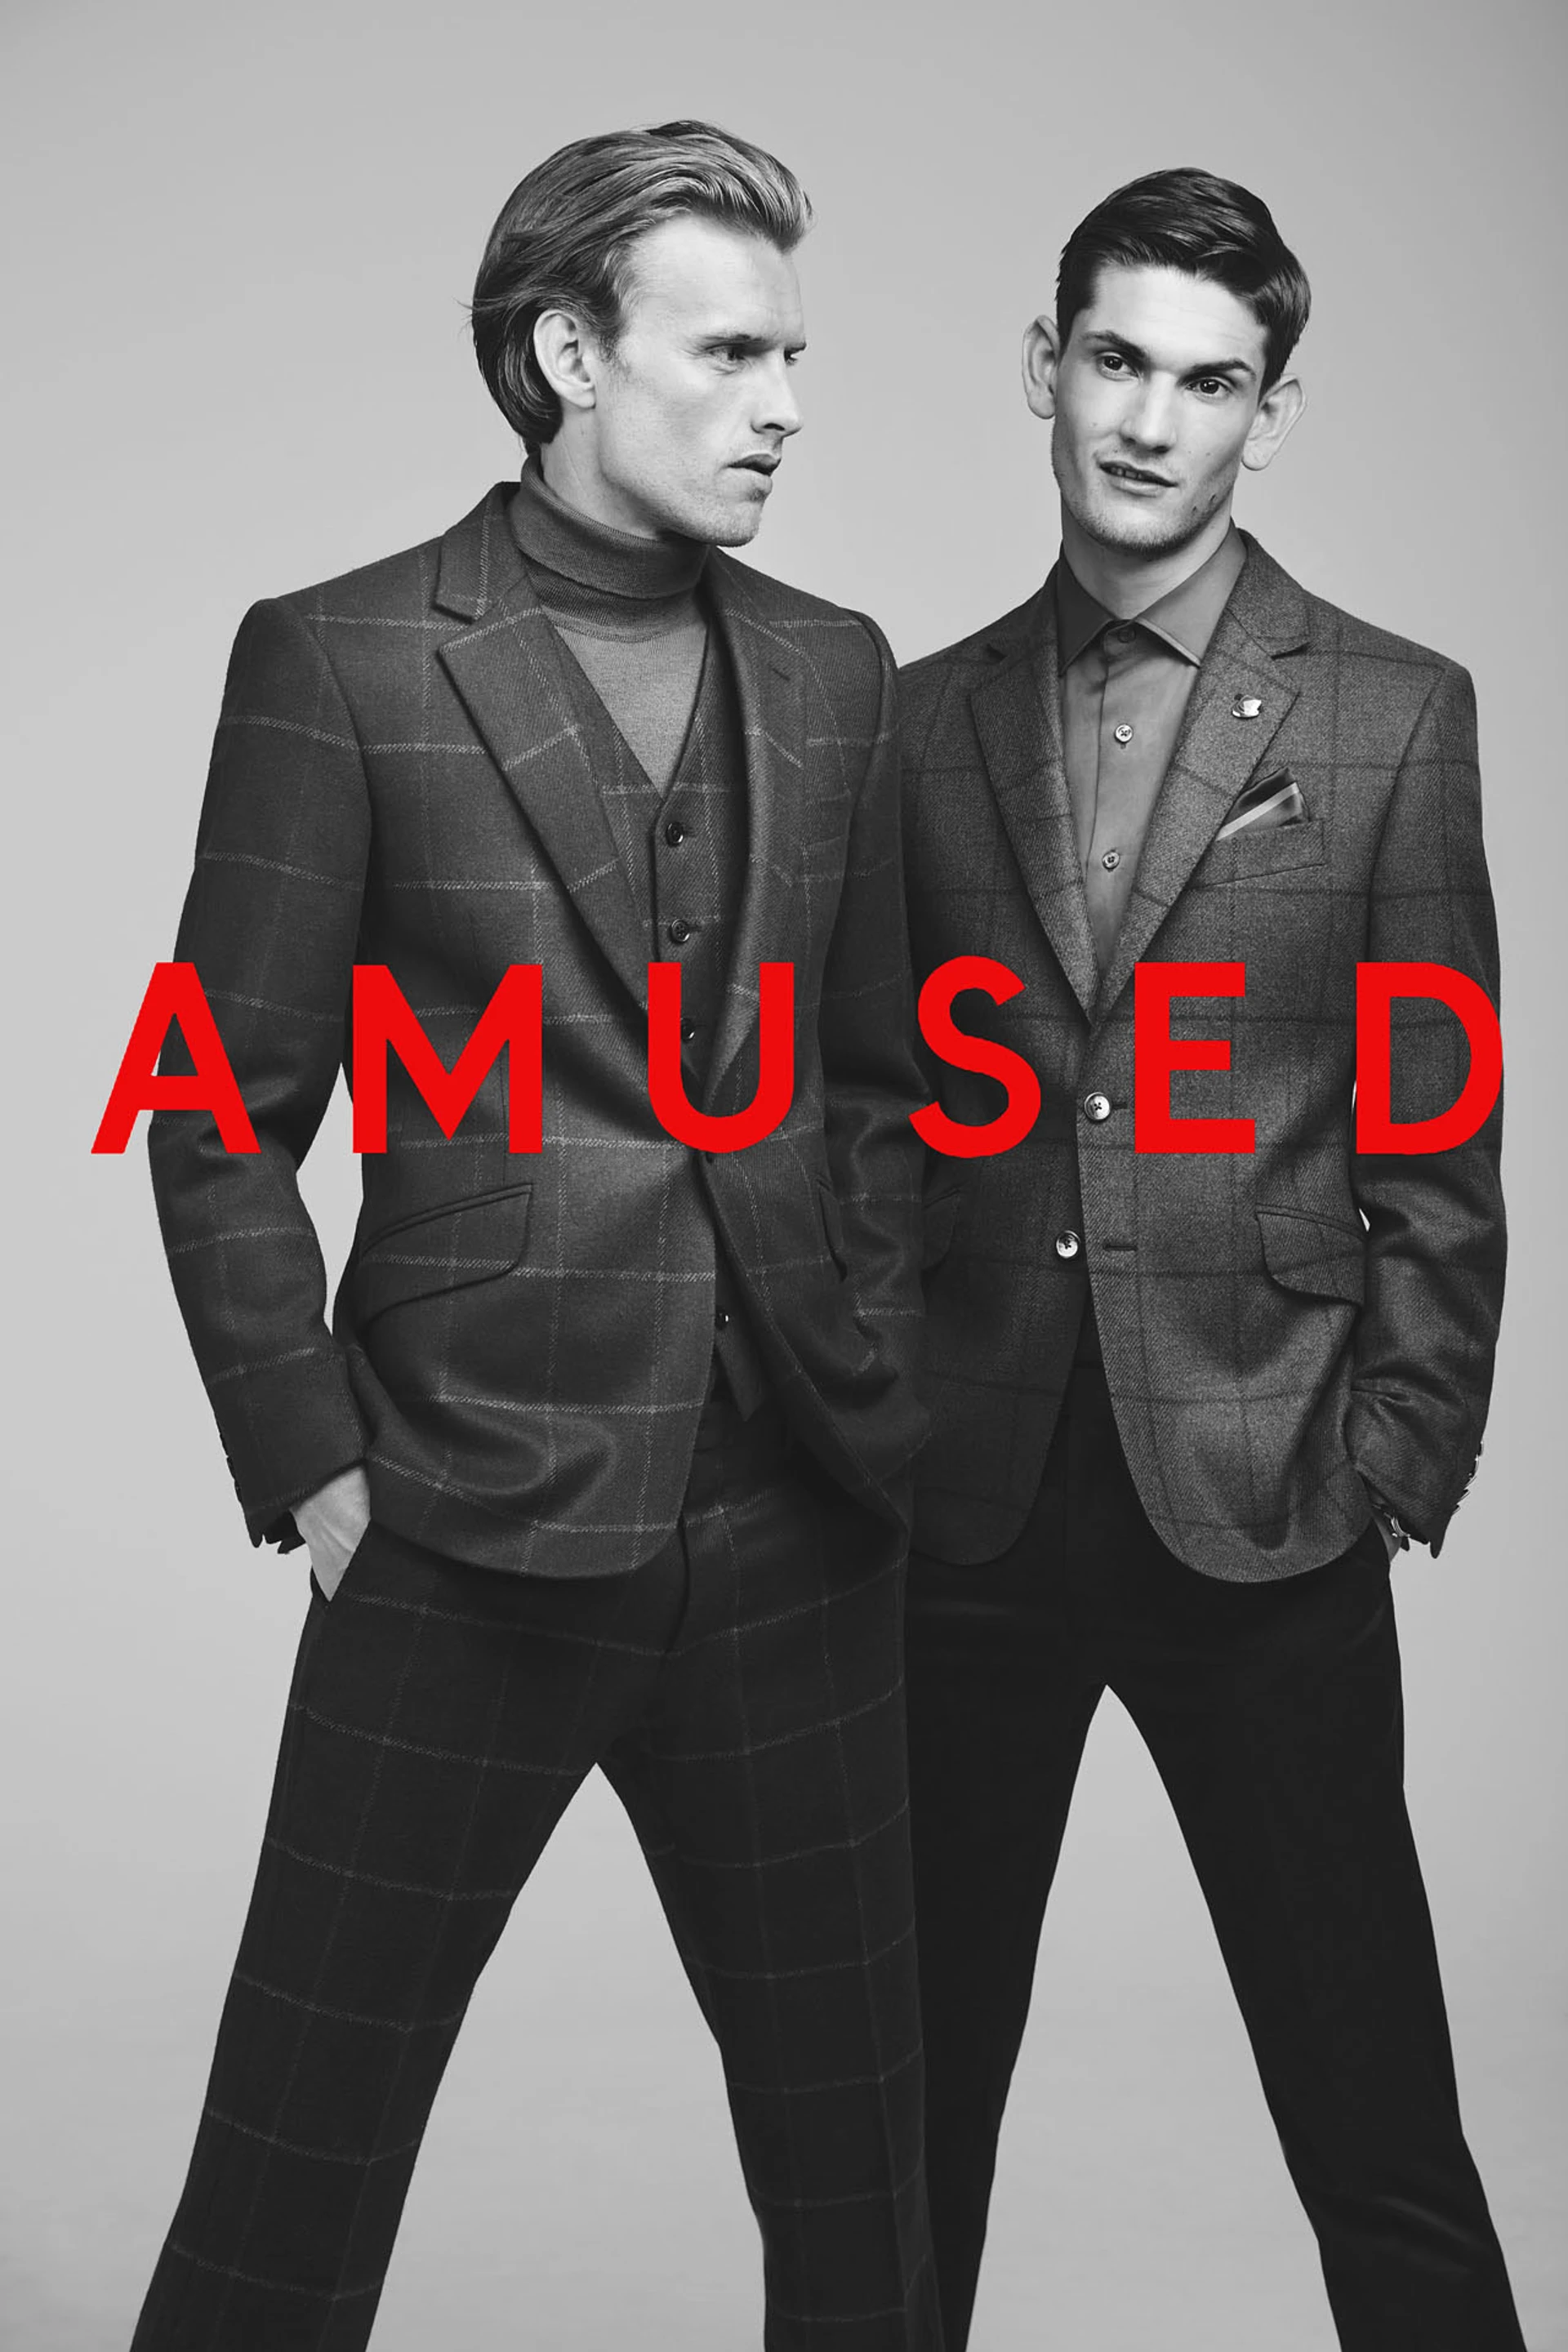 Two men in stylish dark suits, one with a slicked back hairstyle and the other with short hair, posing against a gray background. The word 'AMUSED' is overlaid in bold red letters for Wanted Magazine.